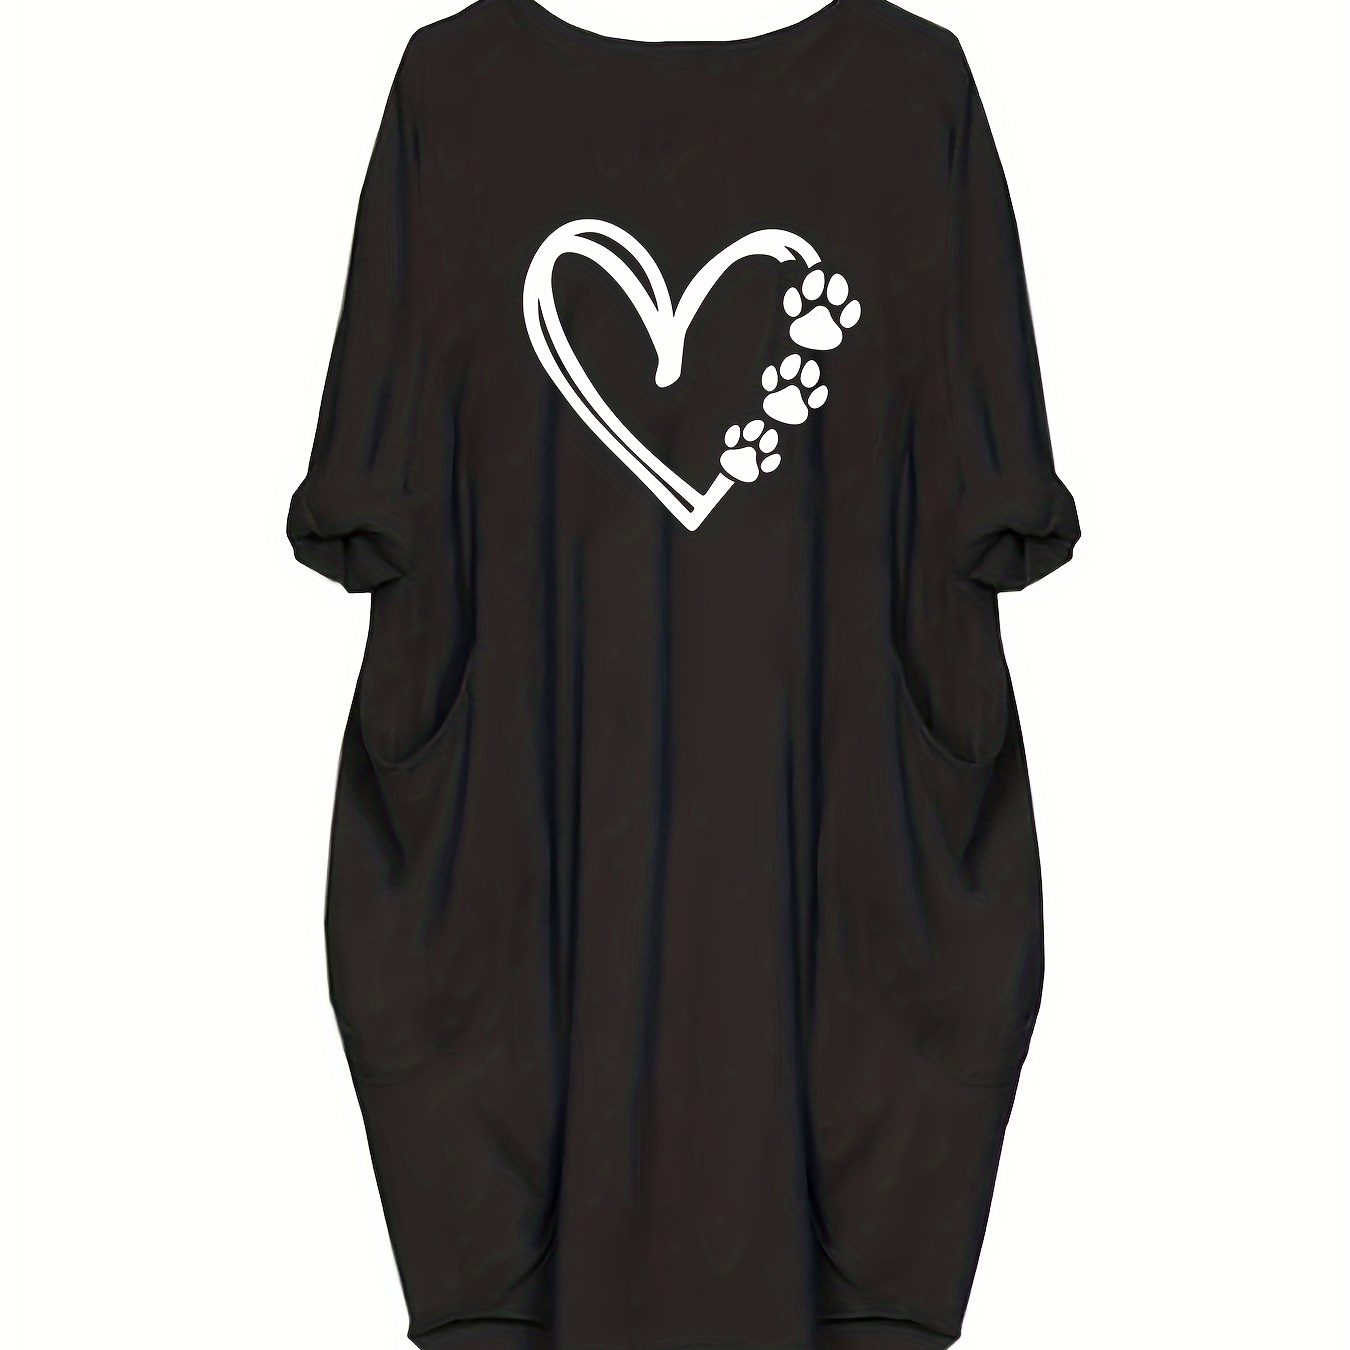 

Plus Size Heart Print Dress, Casual Long Sleeve Crew Neck Dress For Spring, Women's Plus Size clothing